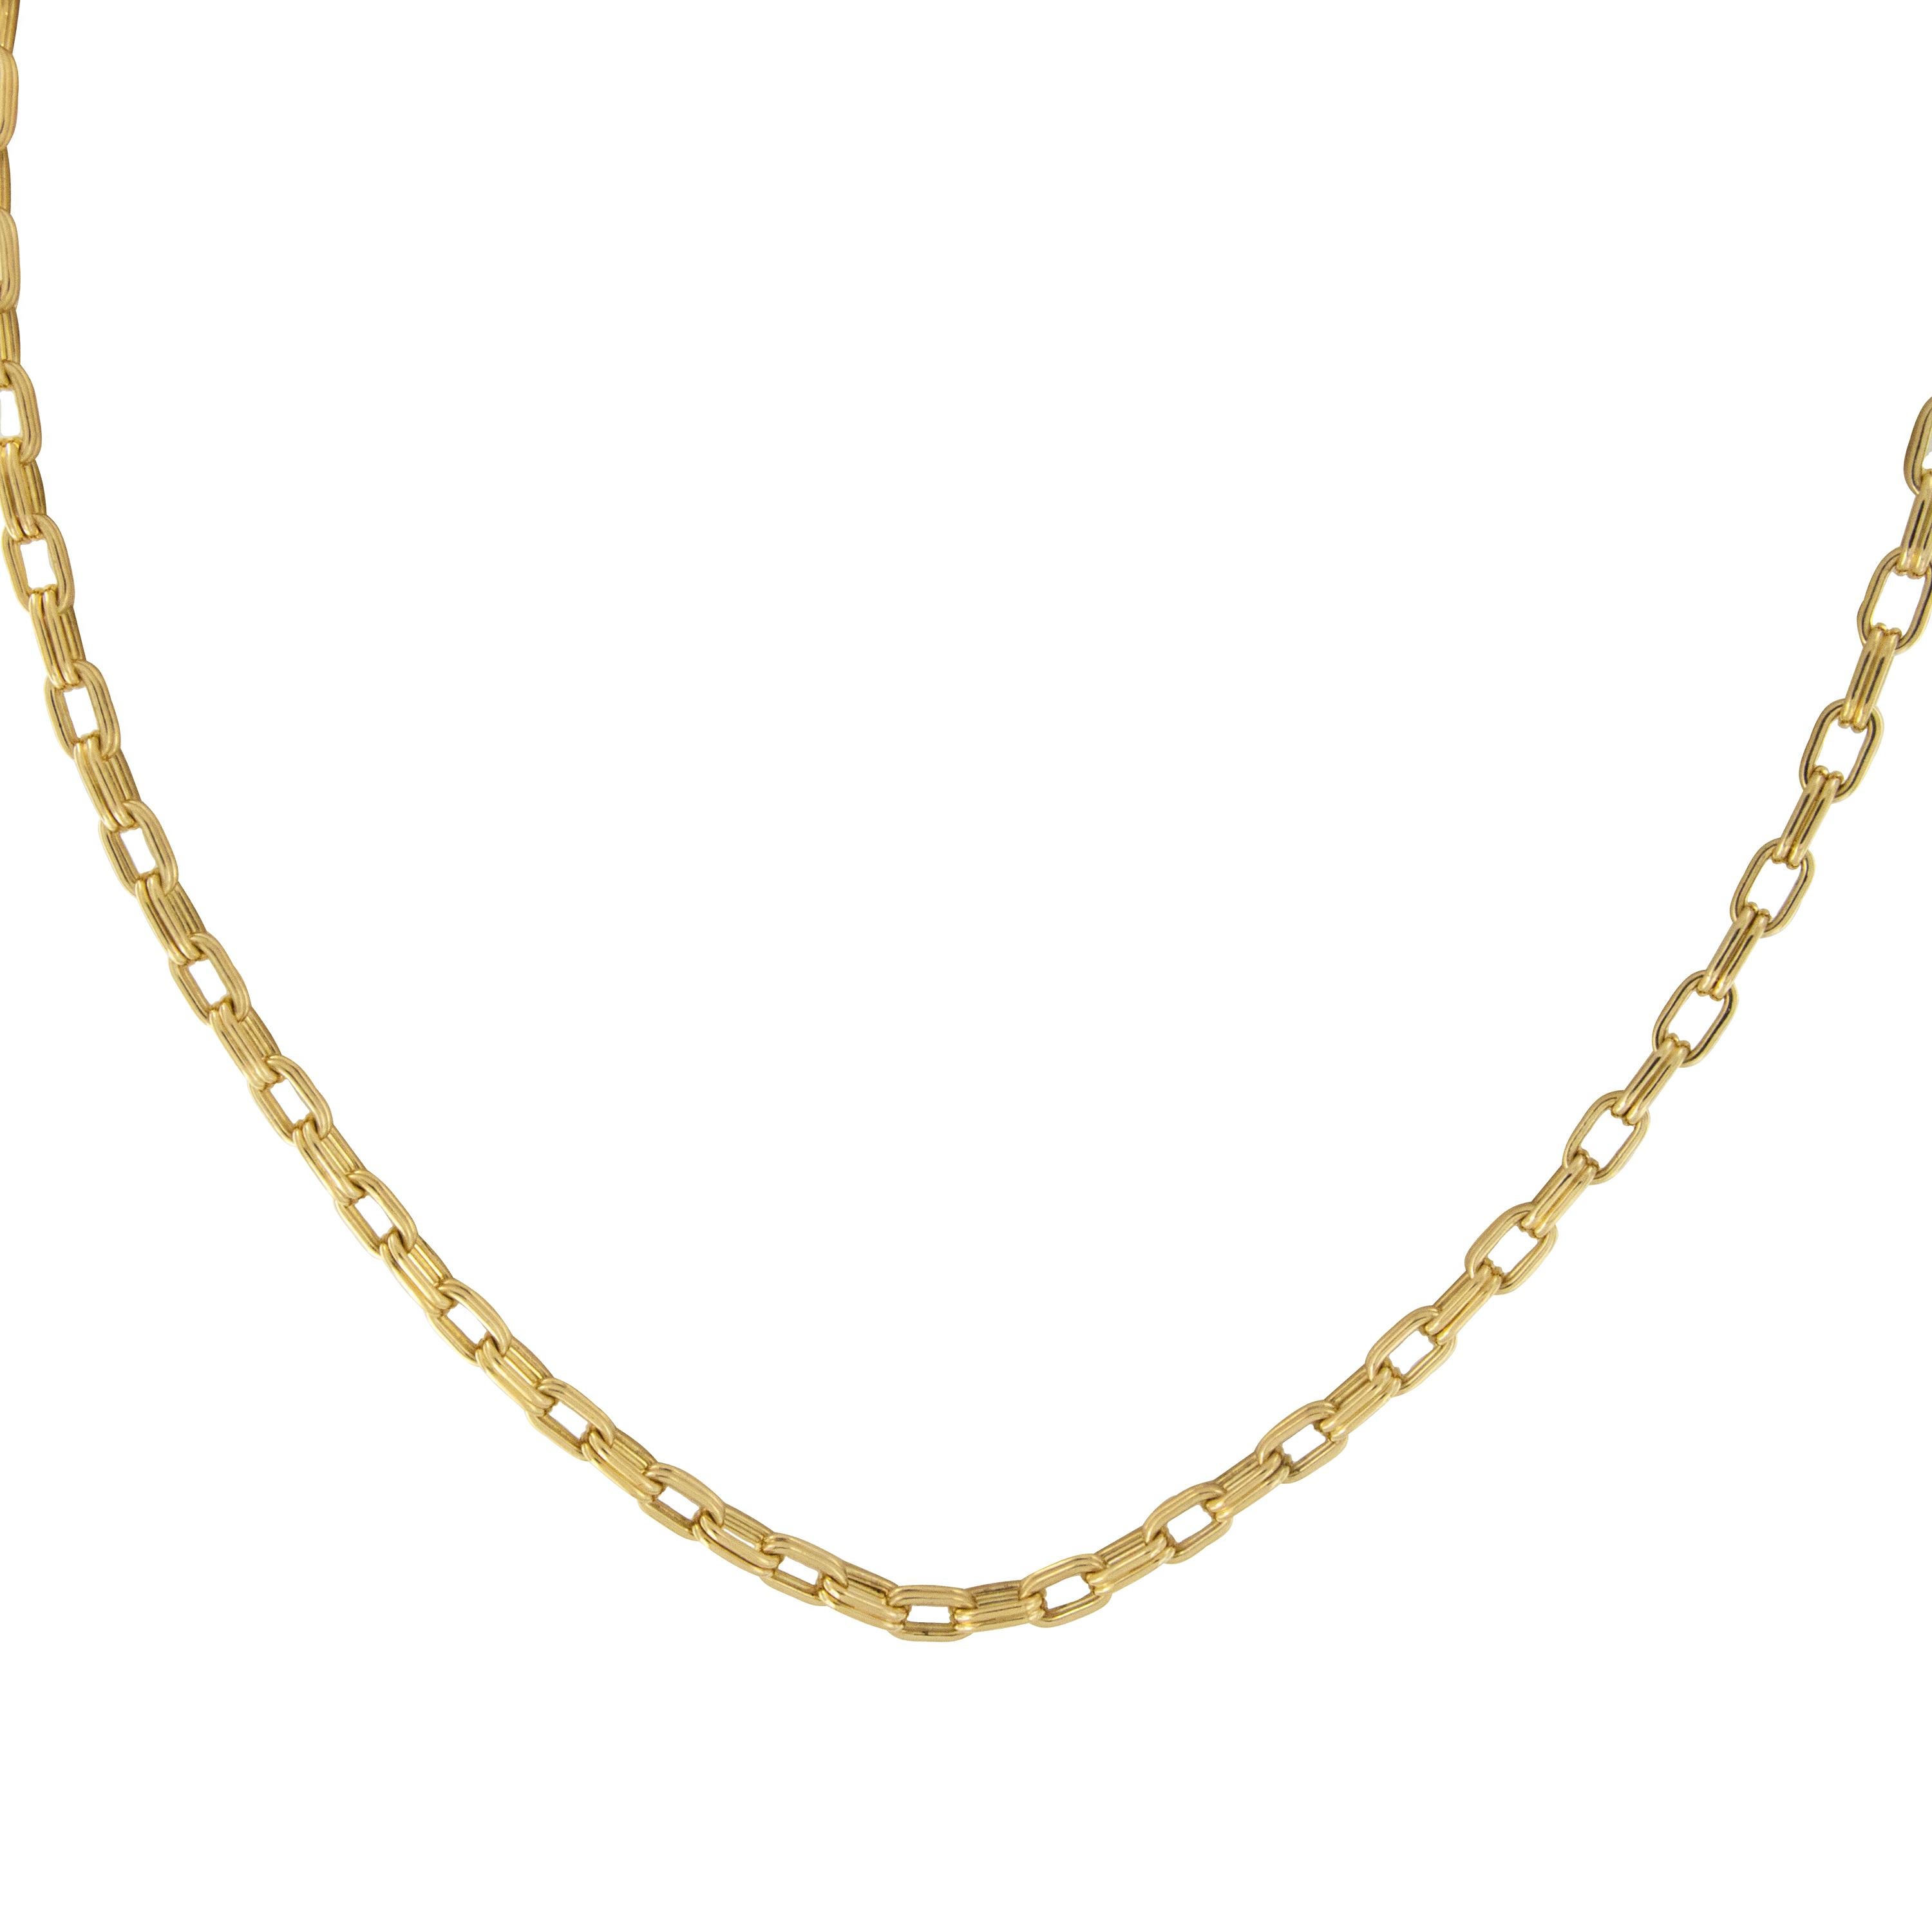 The exceptionally classic design presented in luxurious 18 karat yellow gold in this double oval link long necklace created by the house of Pomellato in Italy is one that stands the test of time, boasting exquisite craftsmanship quality. This